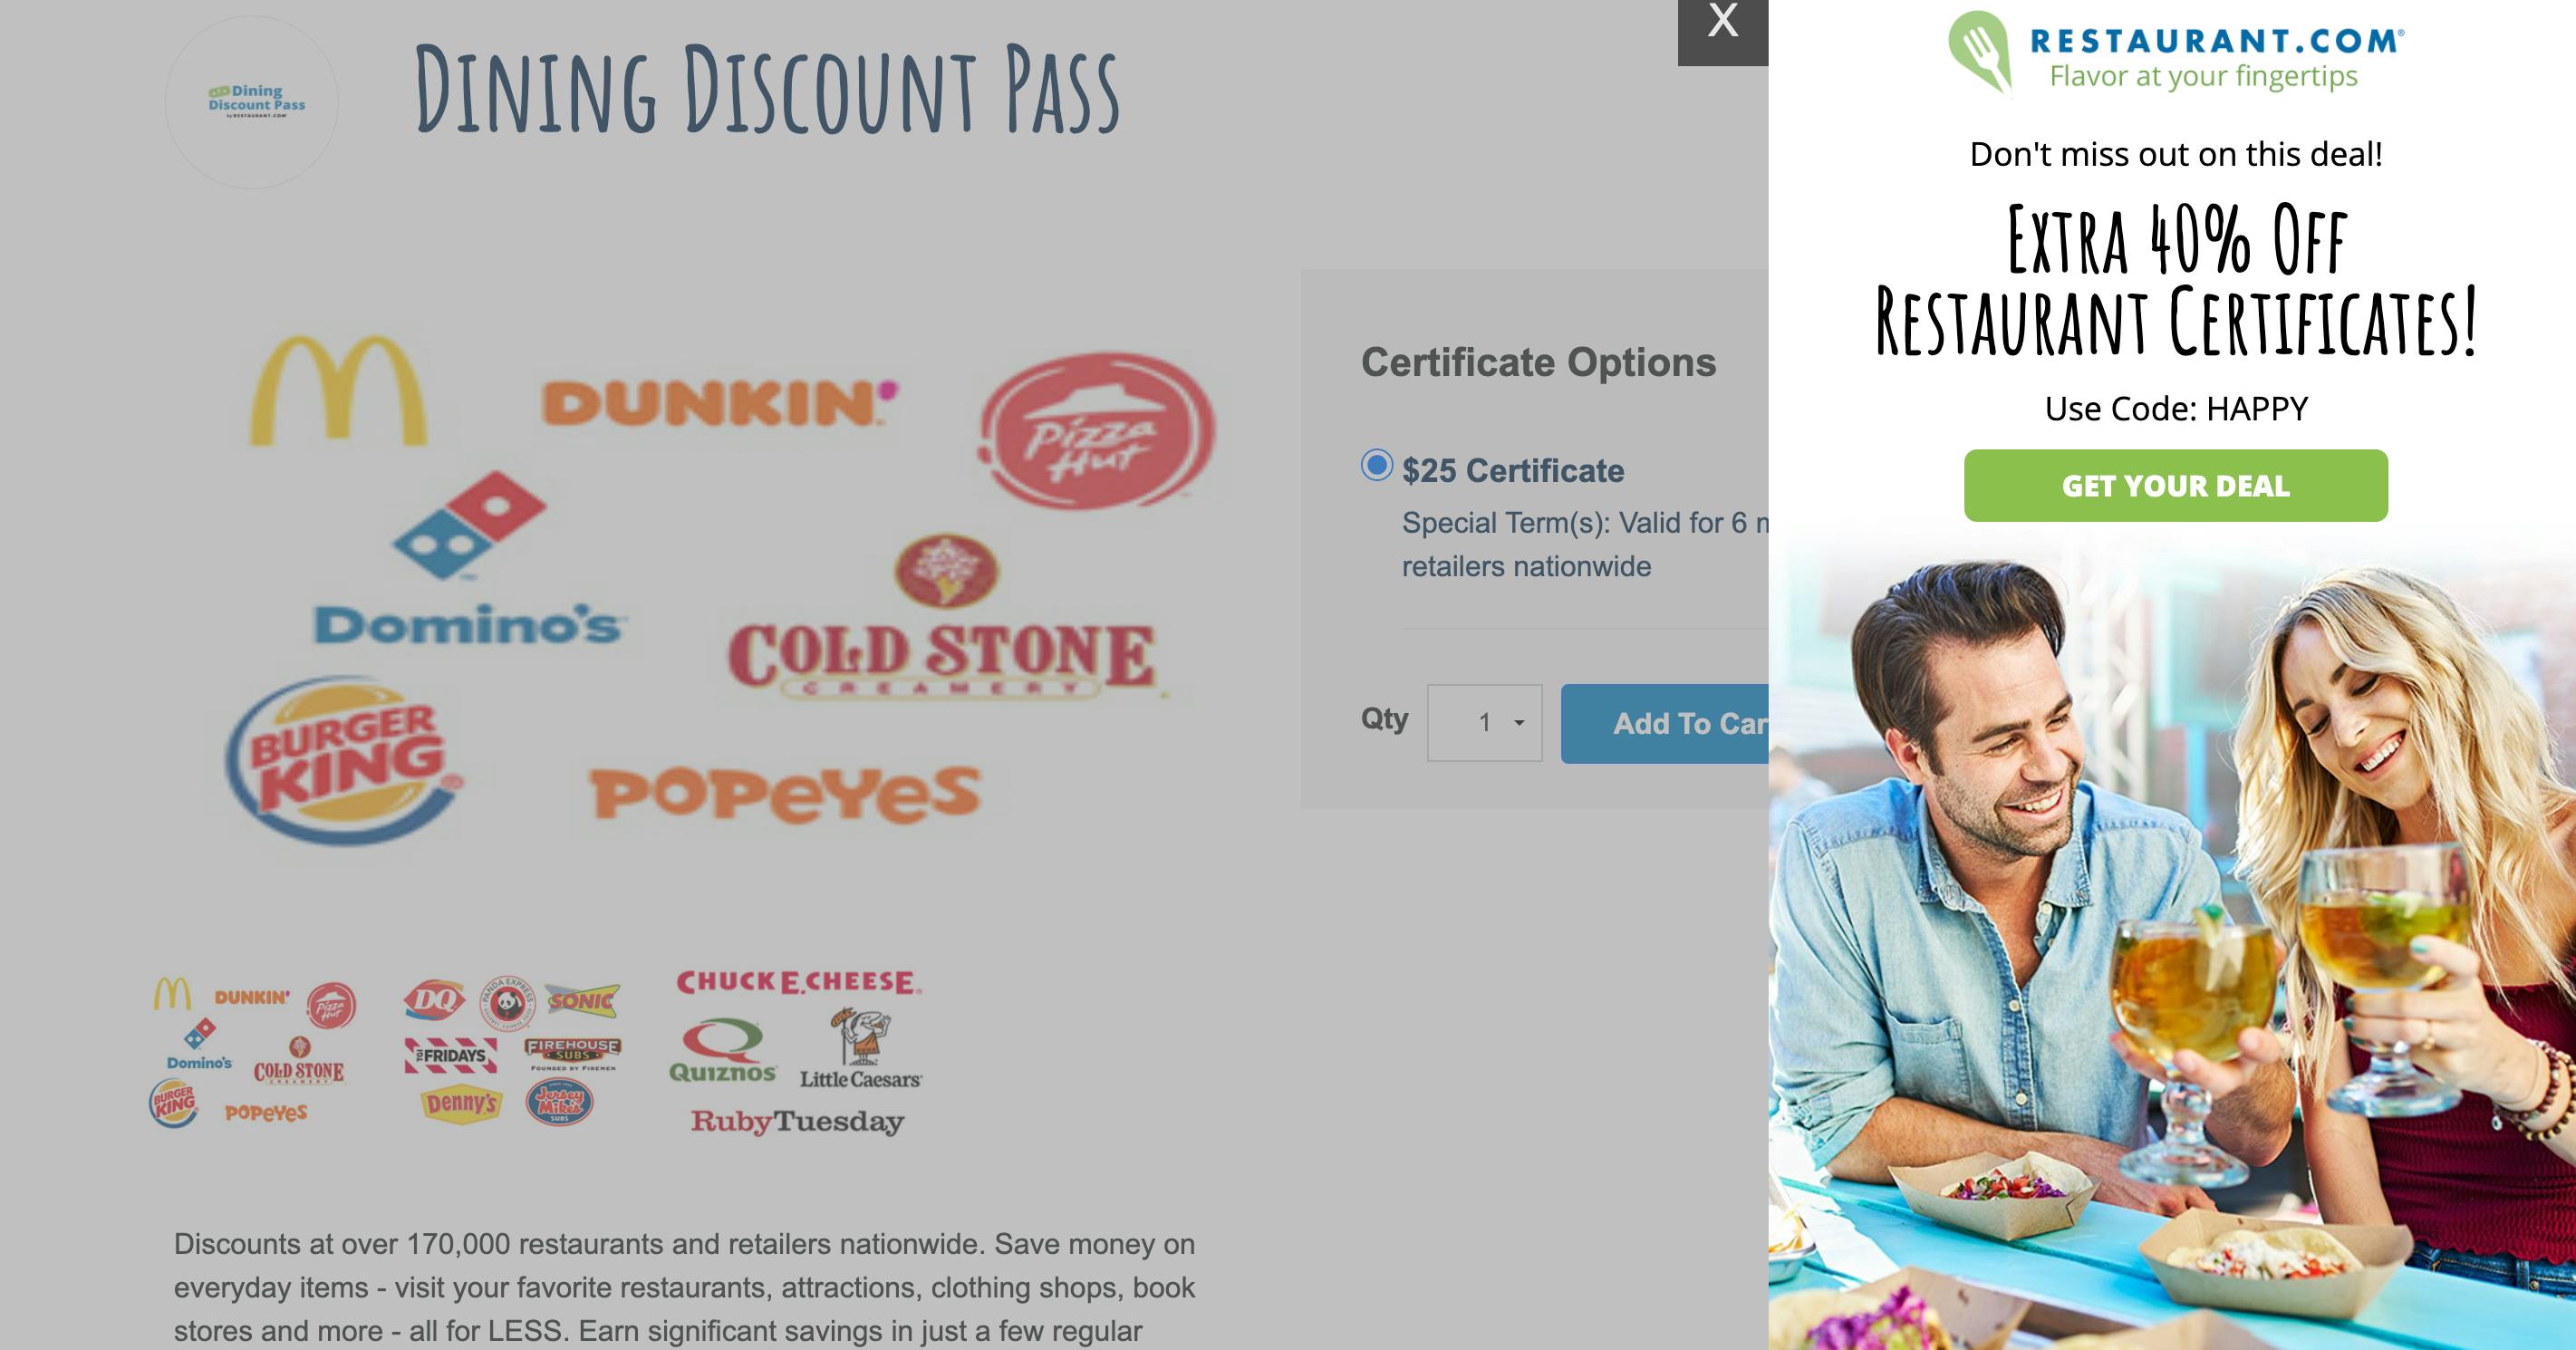 A screenshot of the Restaurants.com Dining Discount Pass page.